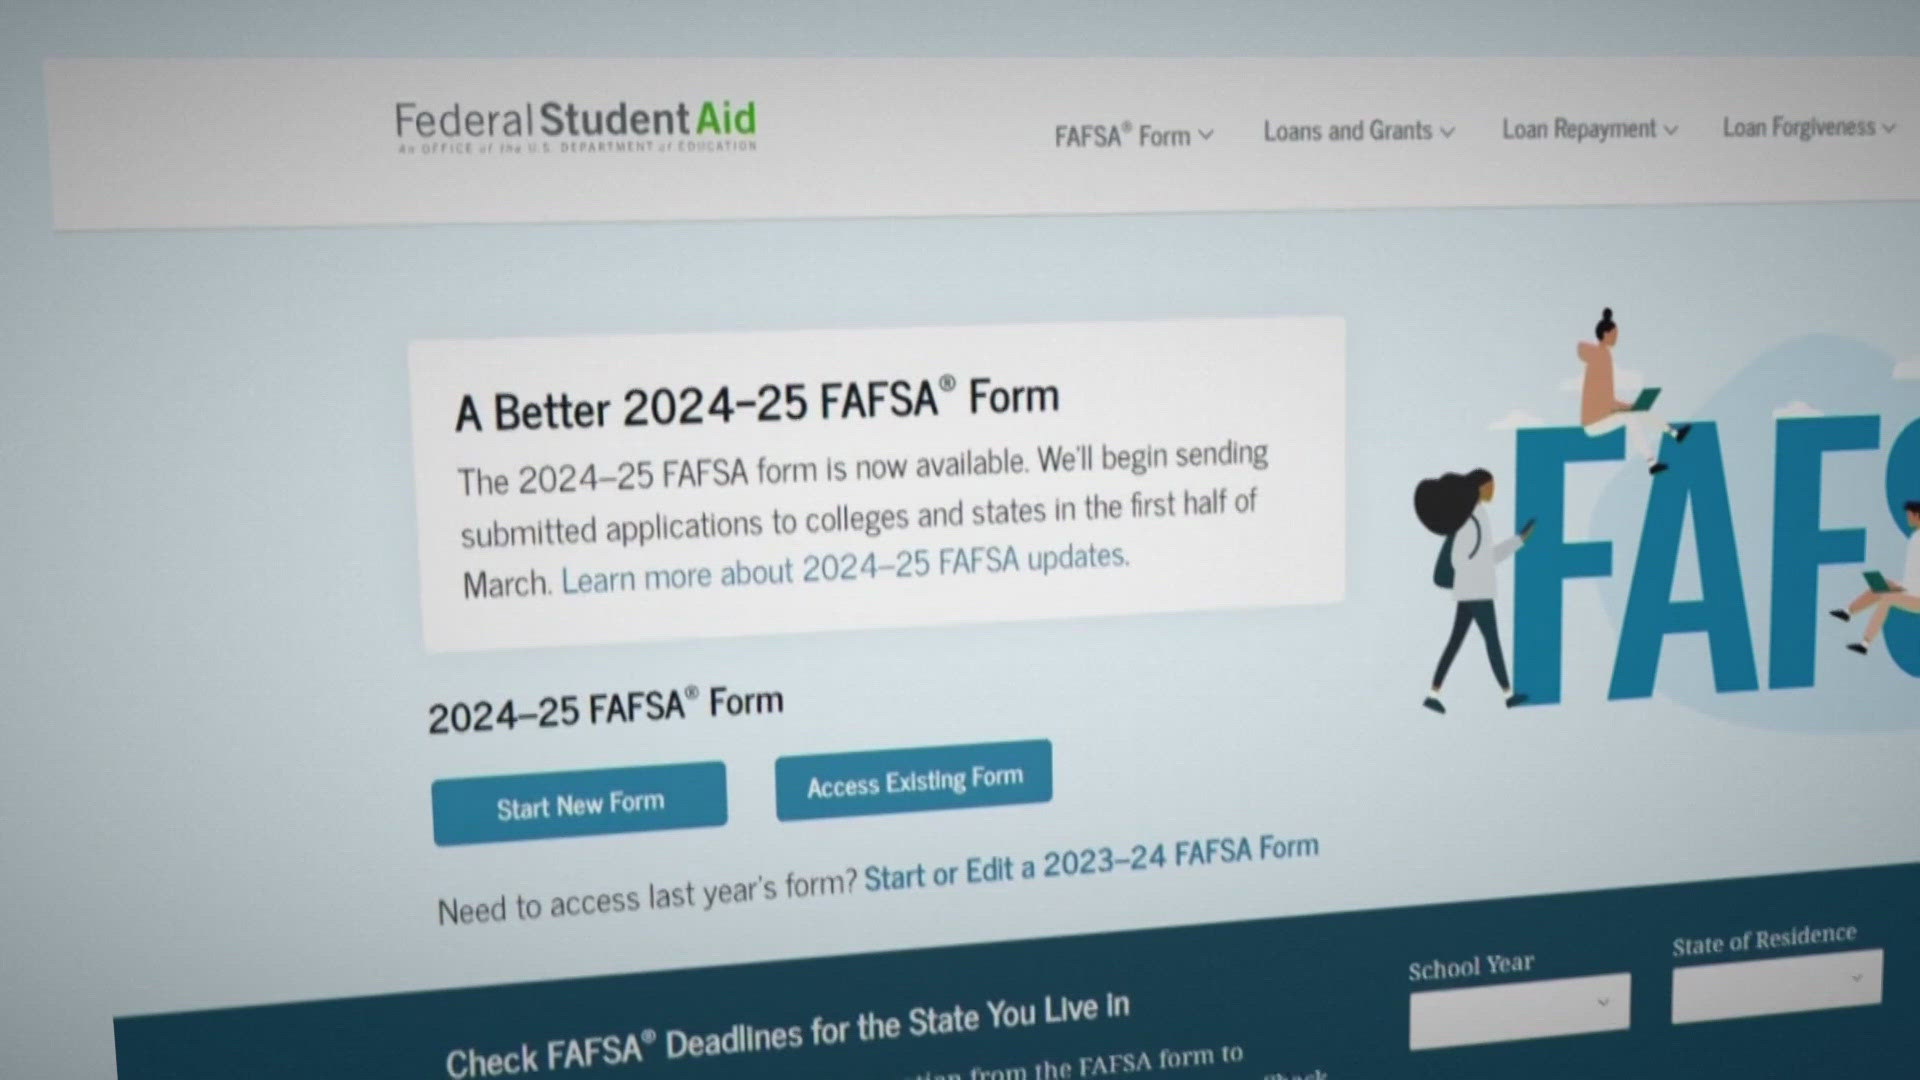 Wednesday, May 15 is the deadline for students to fill out their FAFSA (Free Application For Federal Student Aid).